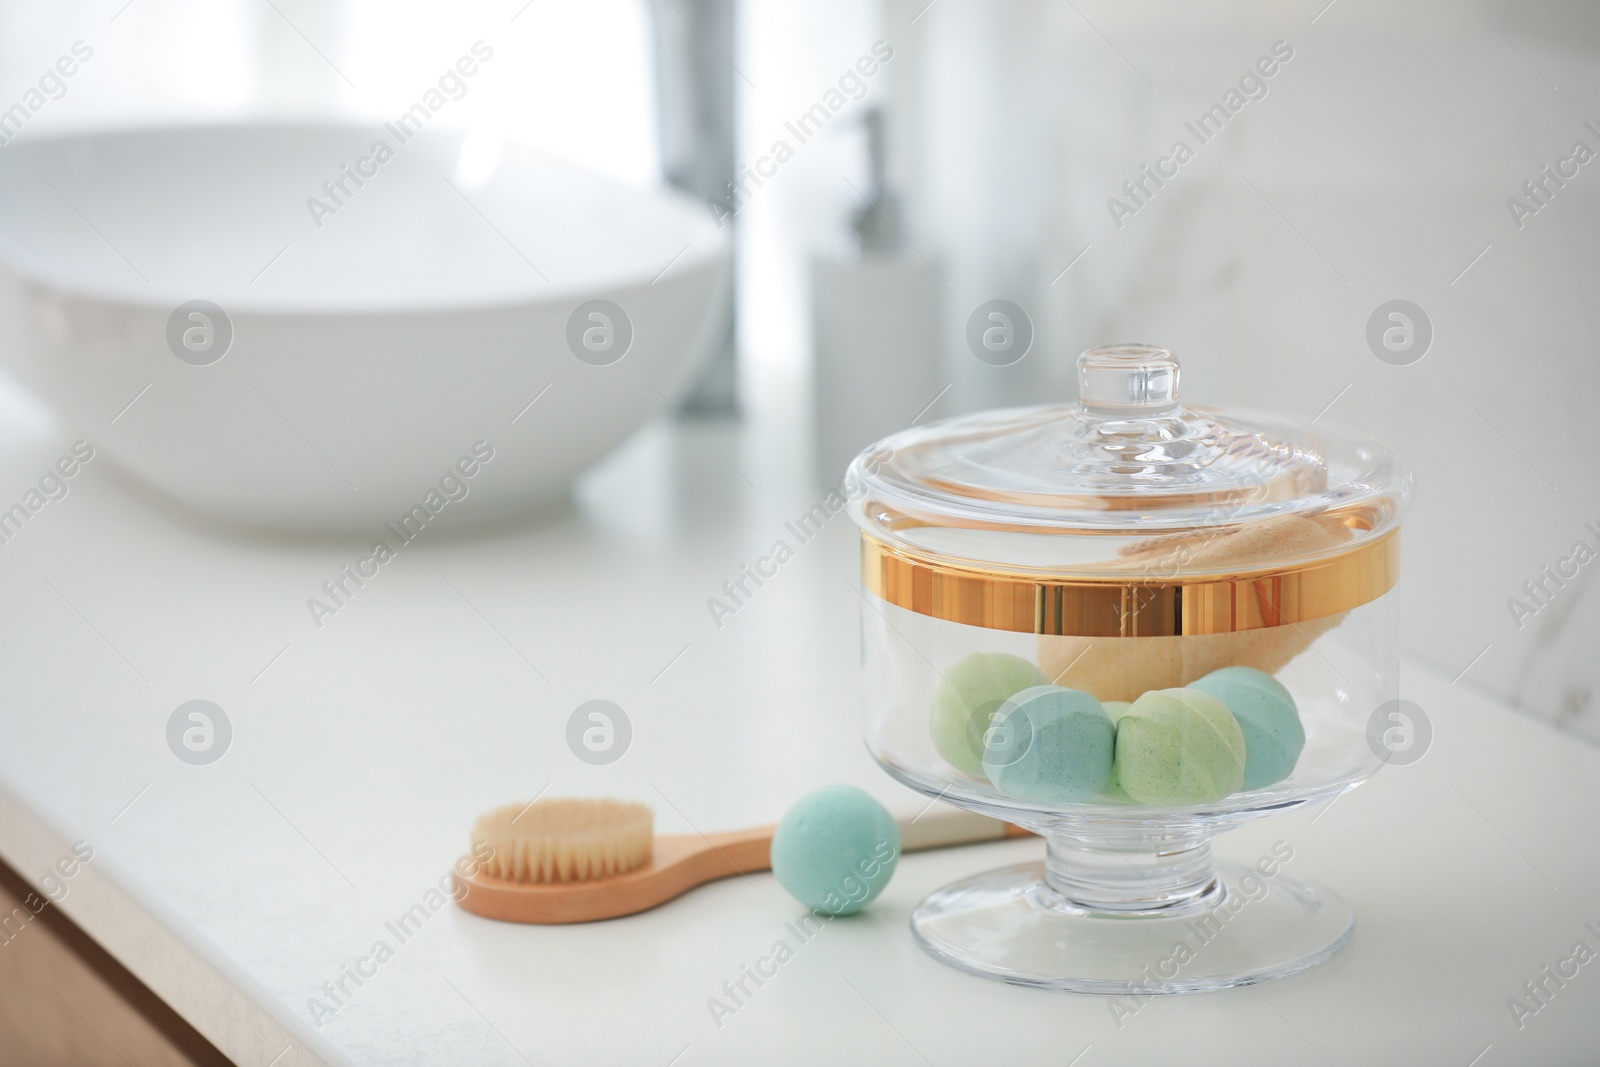 Photo of Jar with bath bombs and loofah sponge on white countertop in bathroom